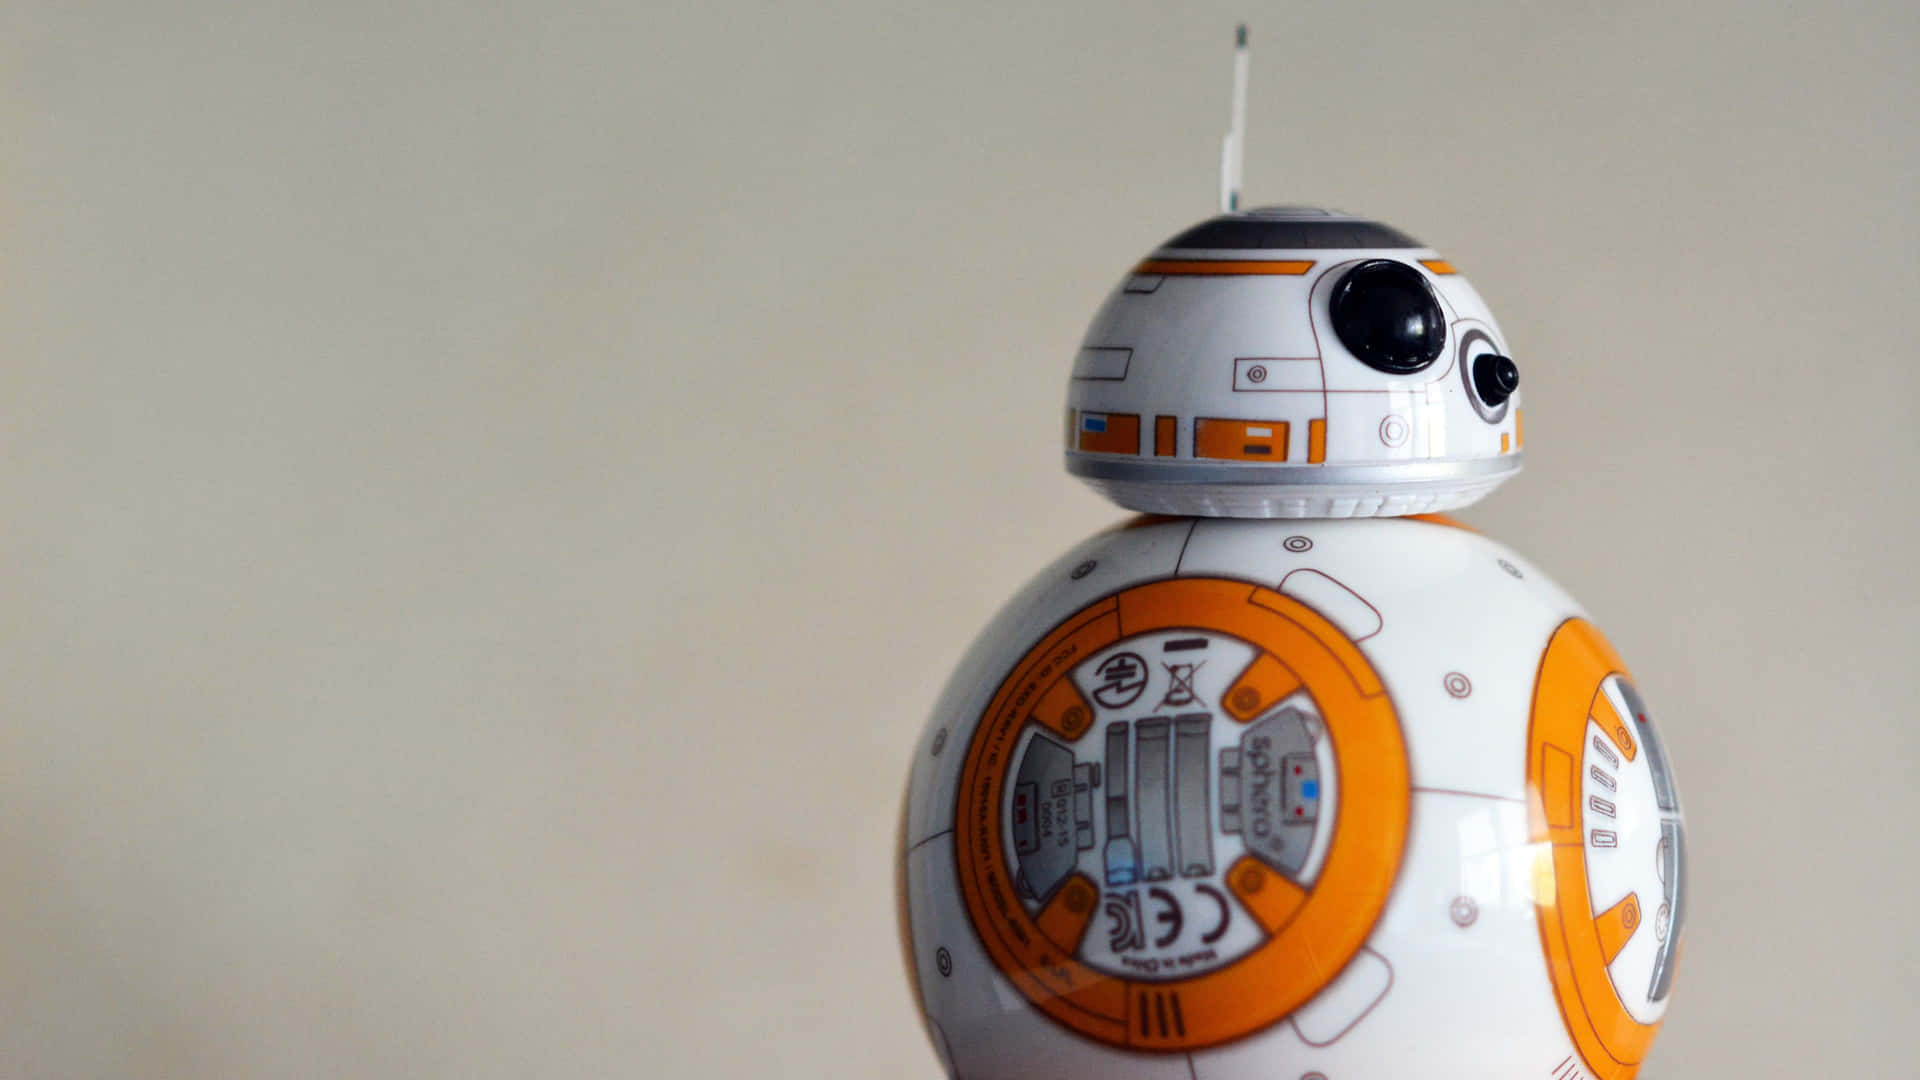 Roll into the action with BB-8!" Wallpaper